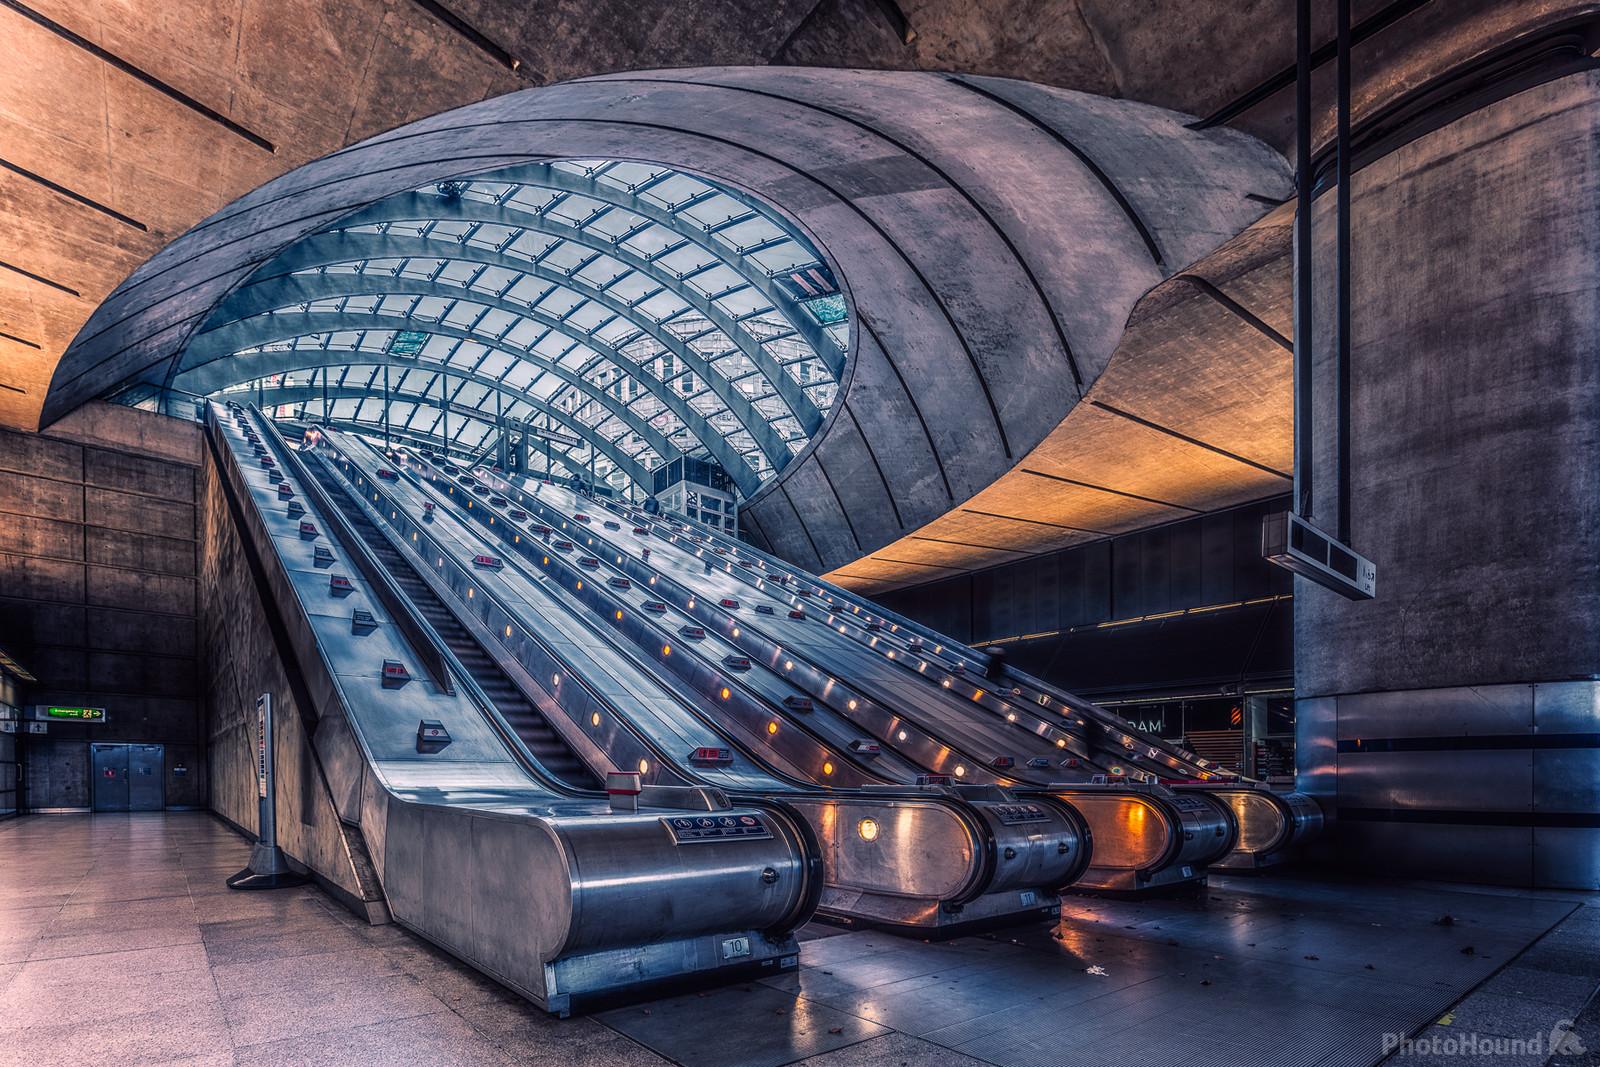 Image of Canary Wharf Underground Station by JAMES BILLINGS